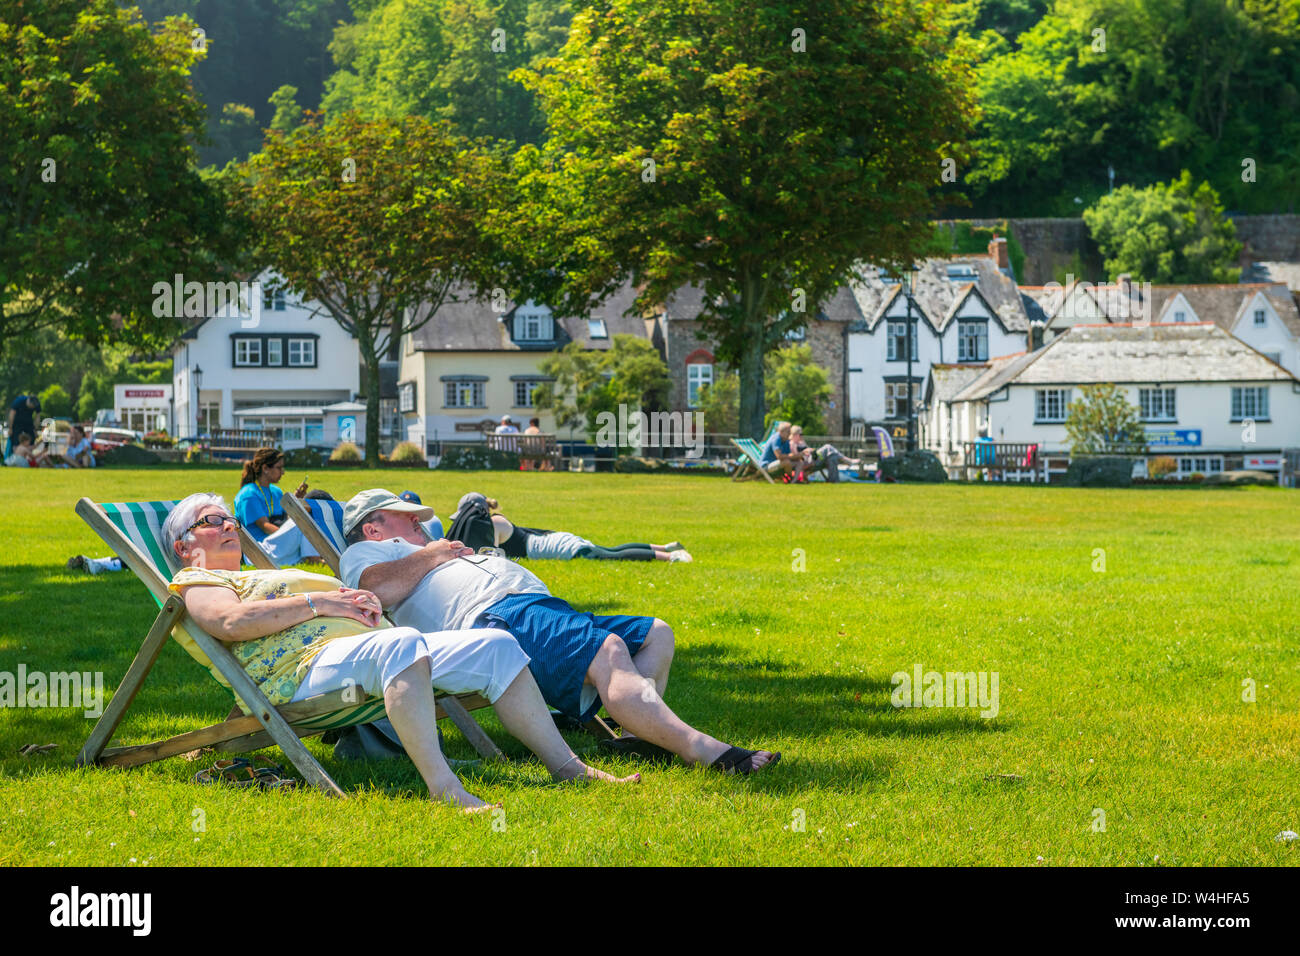 Lynmouth Harbour, North Devon, England. Tuesday 23rd July 2019. UK Weather.  With temperatures soaring under blue skies, holidaymakers enjoy soaking up the sunshine in the little park next to the picturesque harbour at Lynmouth in North Devon. Credit: Terry Mathews/Alamy Live News Stock Photo